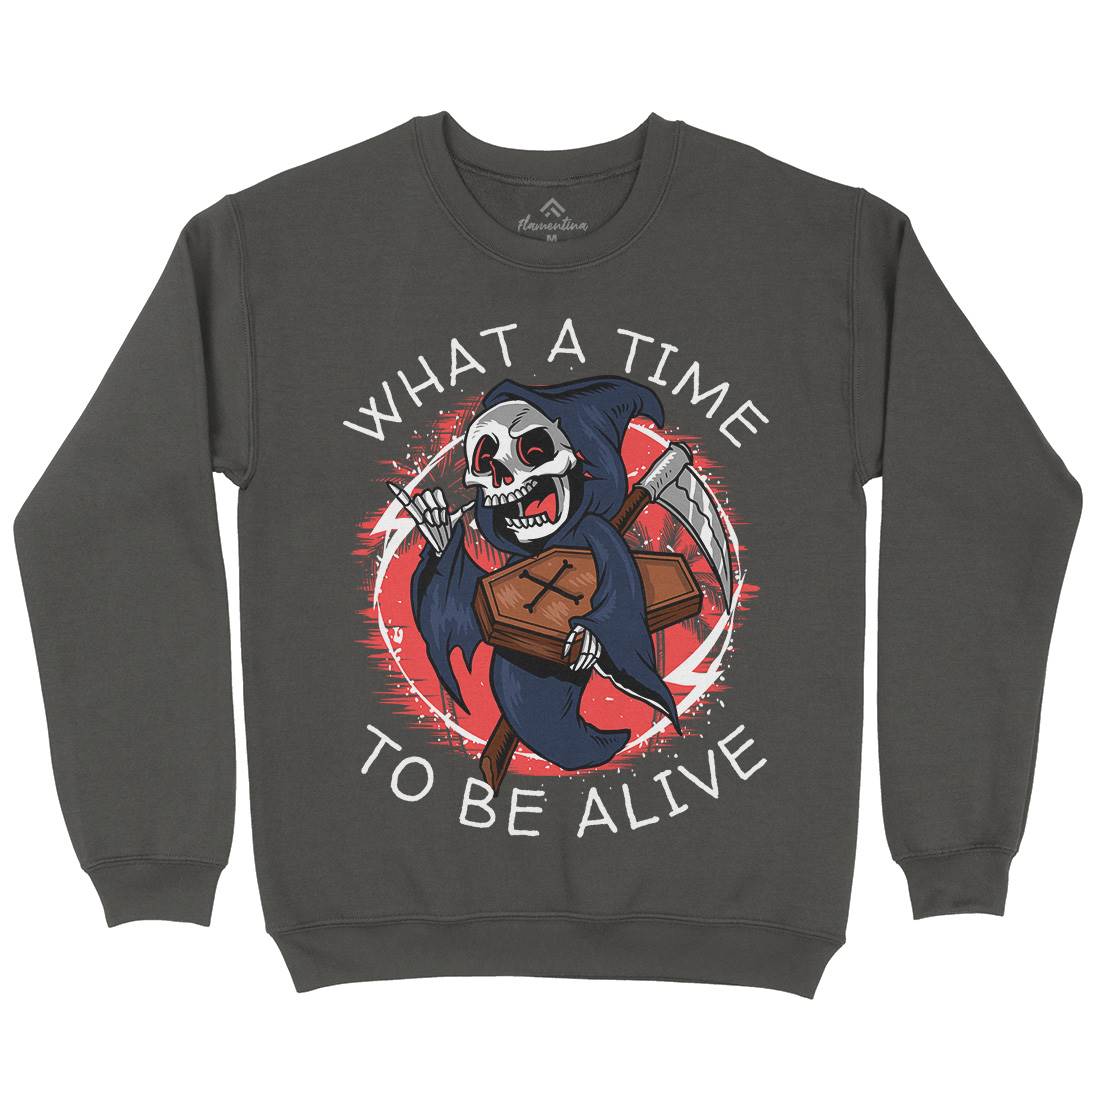 What A Time To Be Alive Mens Crew Neck Sweatshirt Funny D096